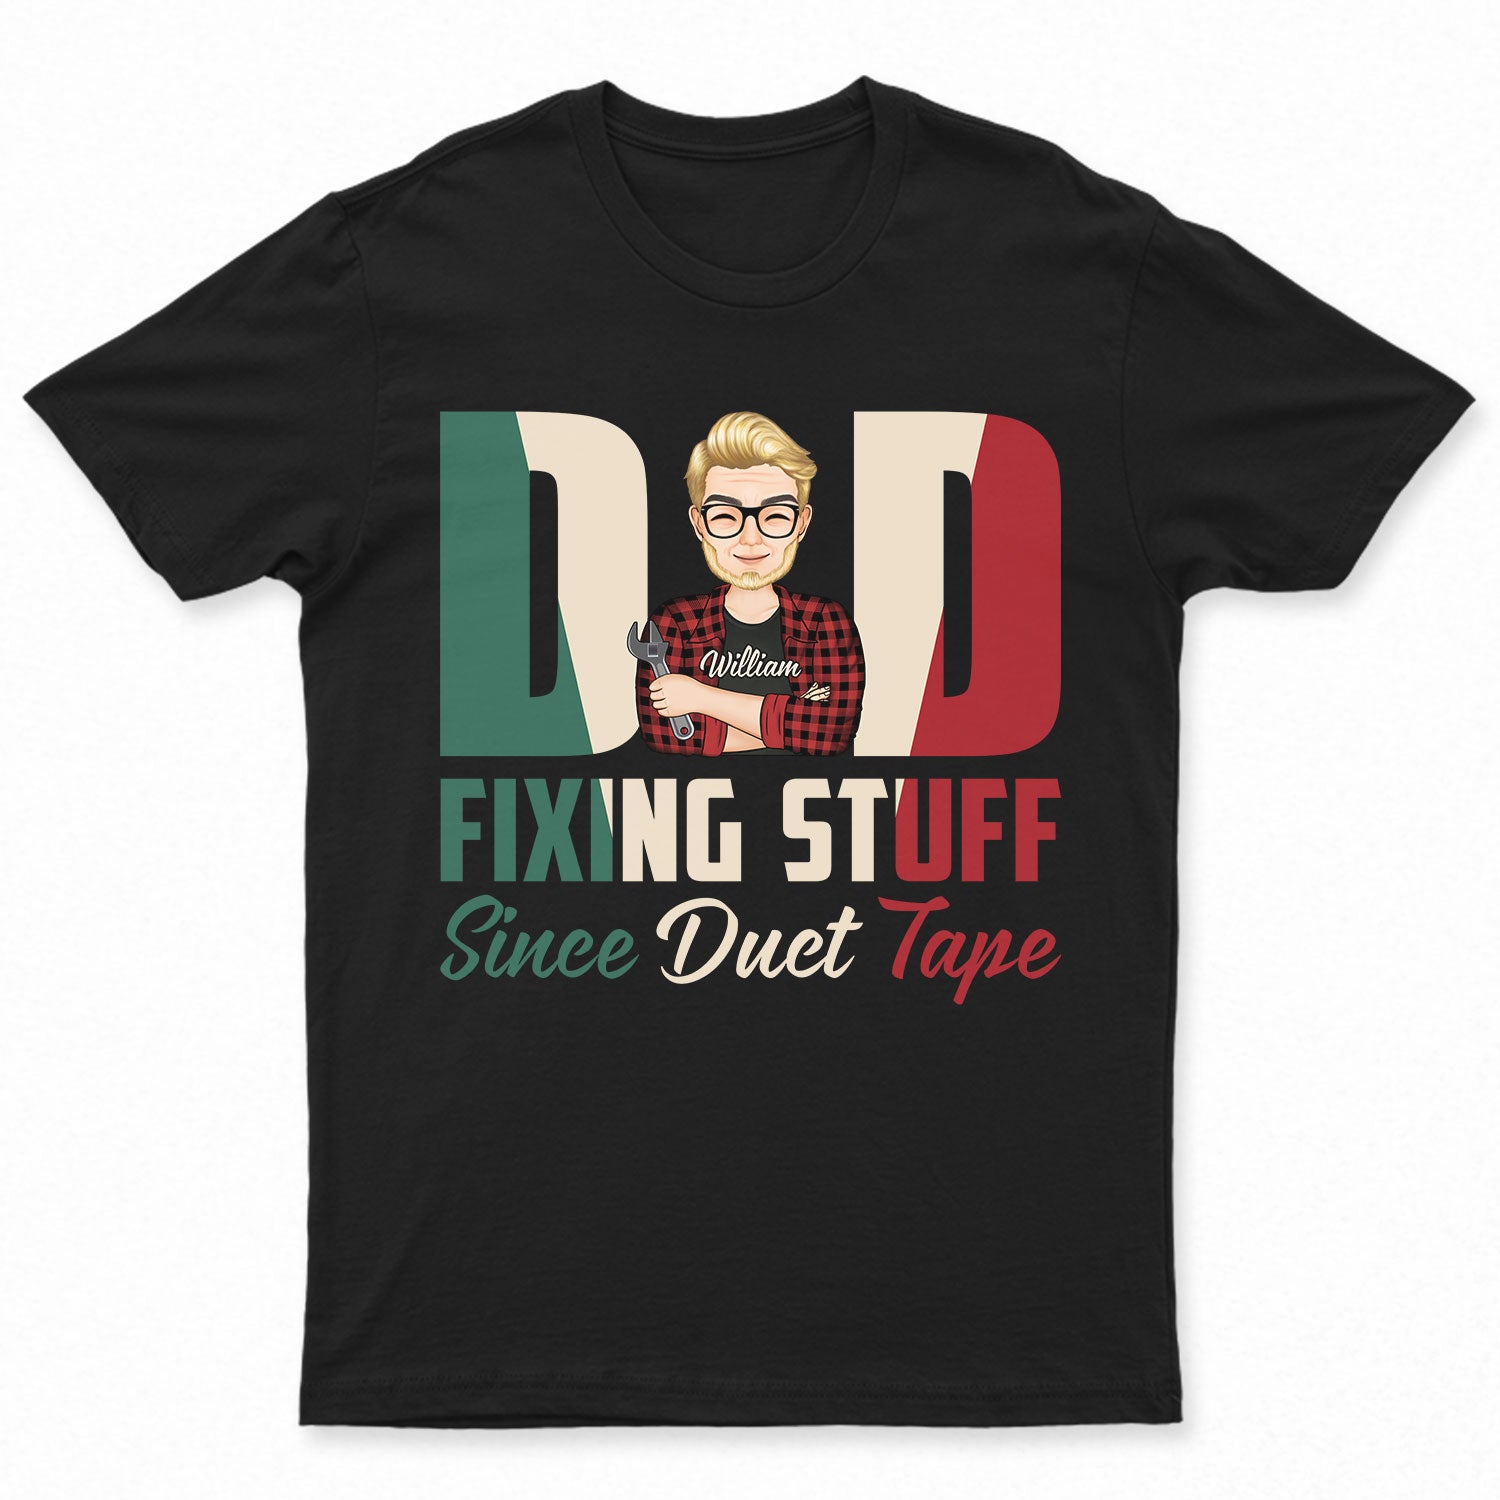 Since Duct Tape - Gift For Father - Personalized Custom T Shirt